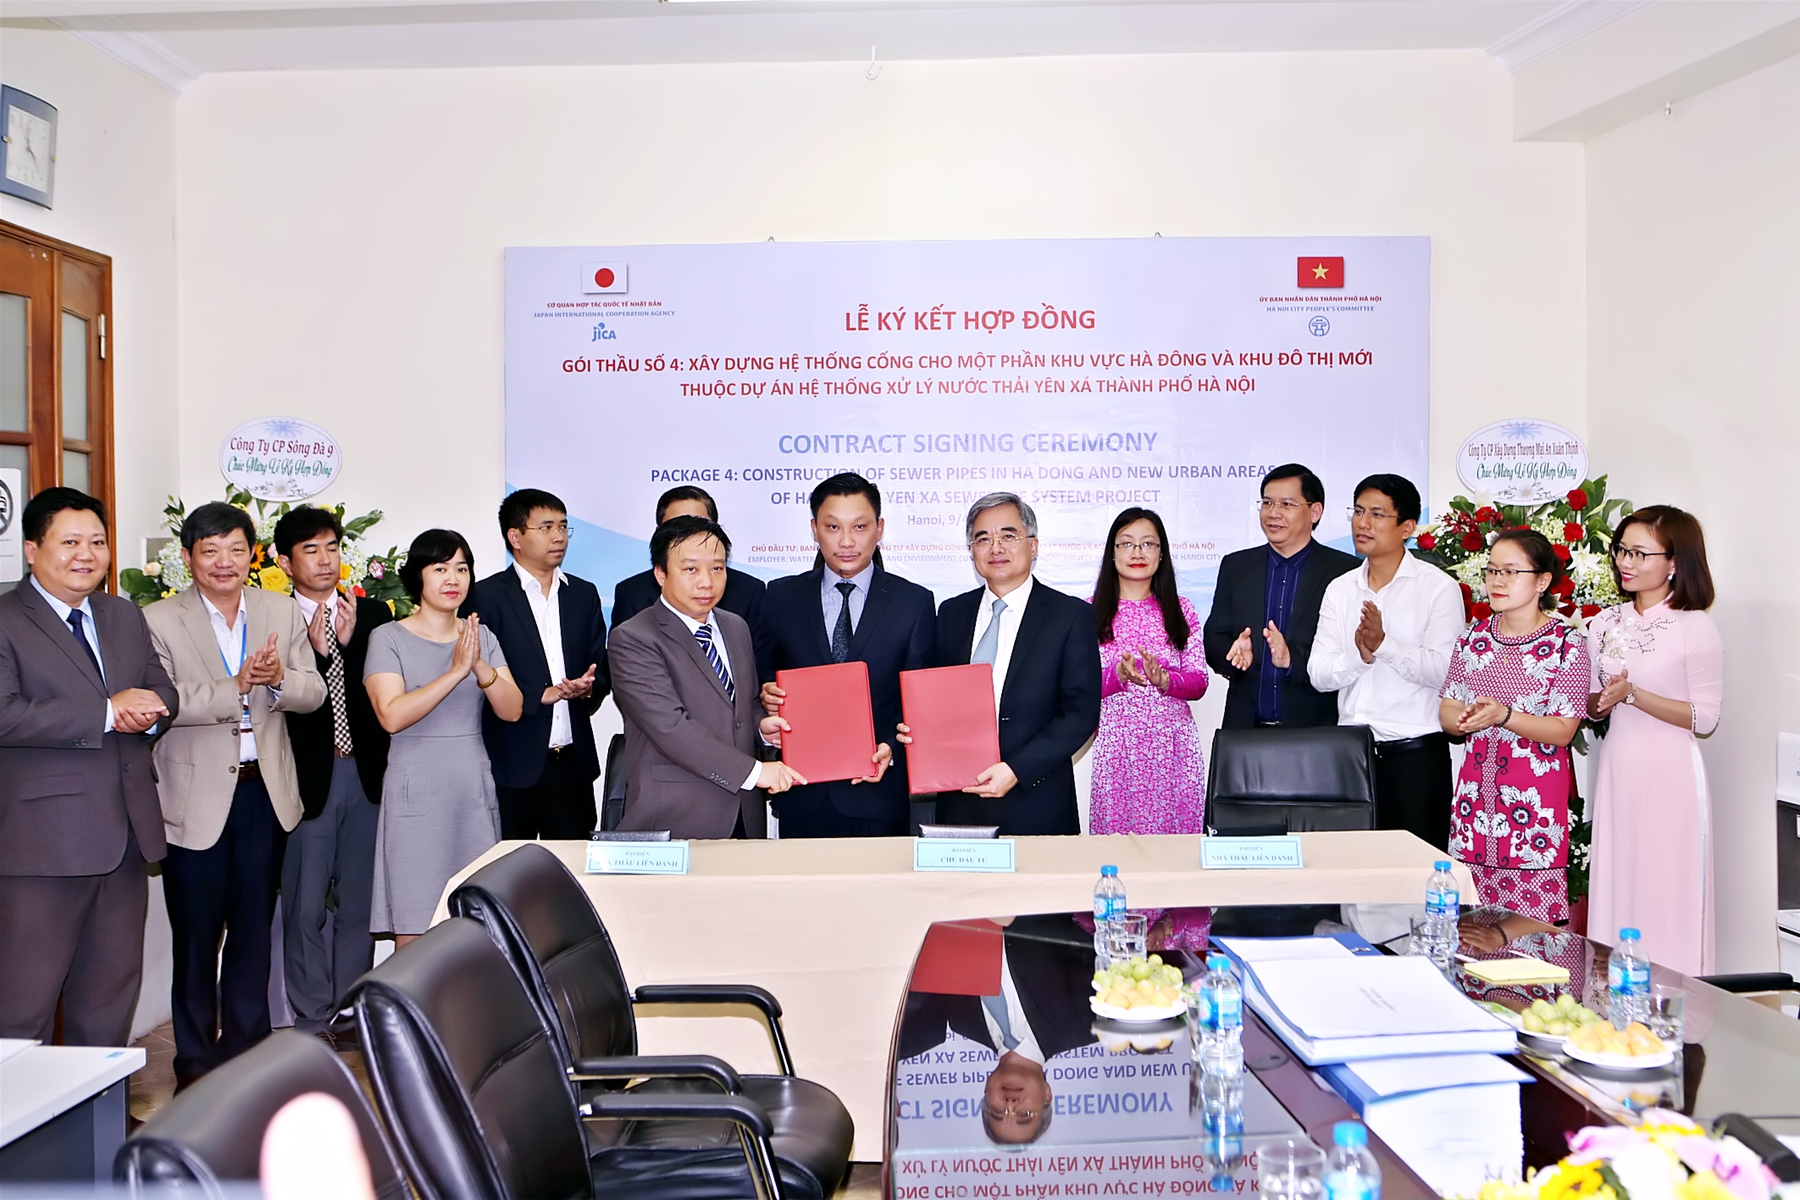 An Xuan Thinh – Song Da 9 Joint Venture signed the contract for Package 04, Hanoi City Yen Xa Sewerage System Project